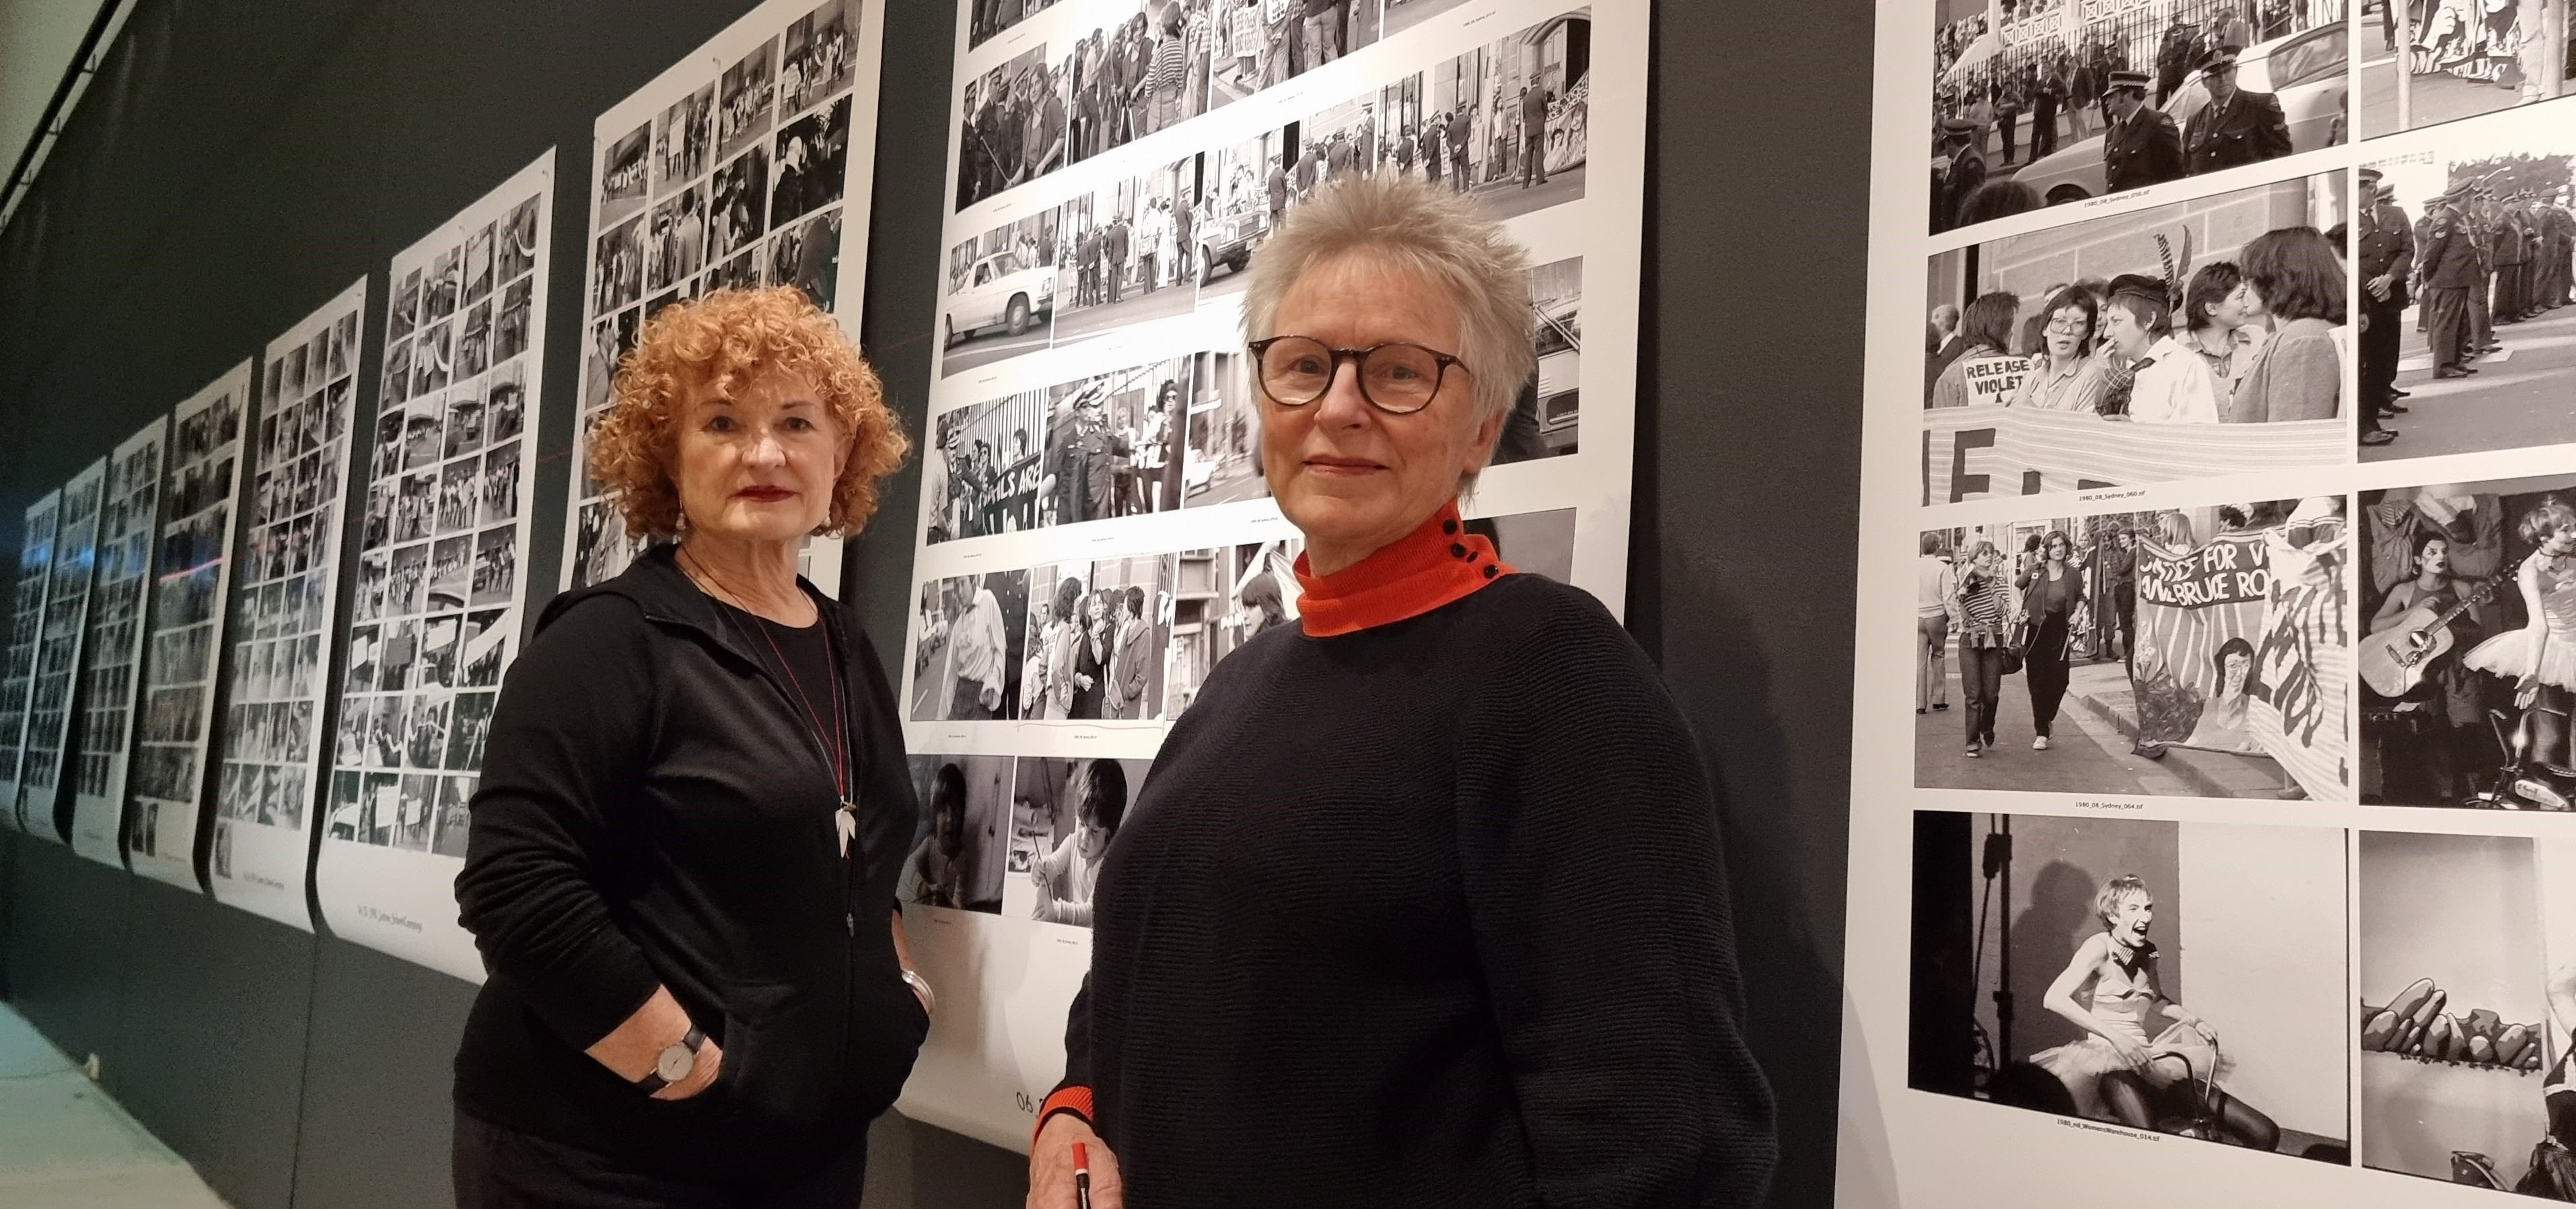 Glimpses into social and political history at Wagga Winter Exhibition